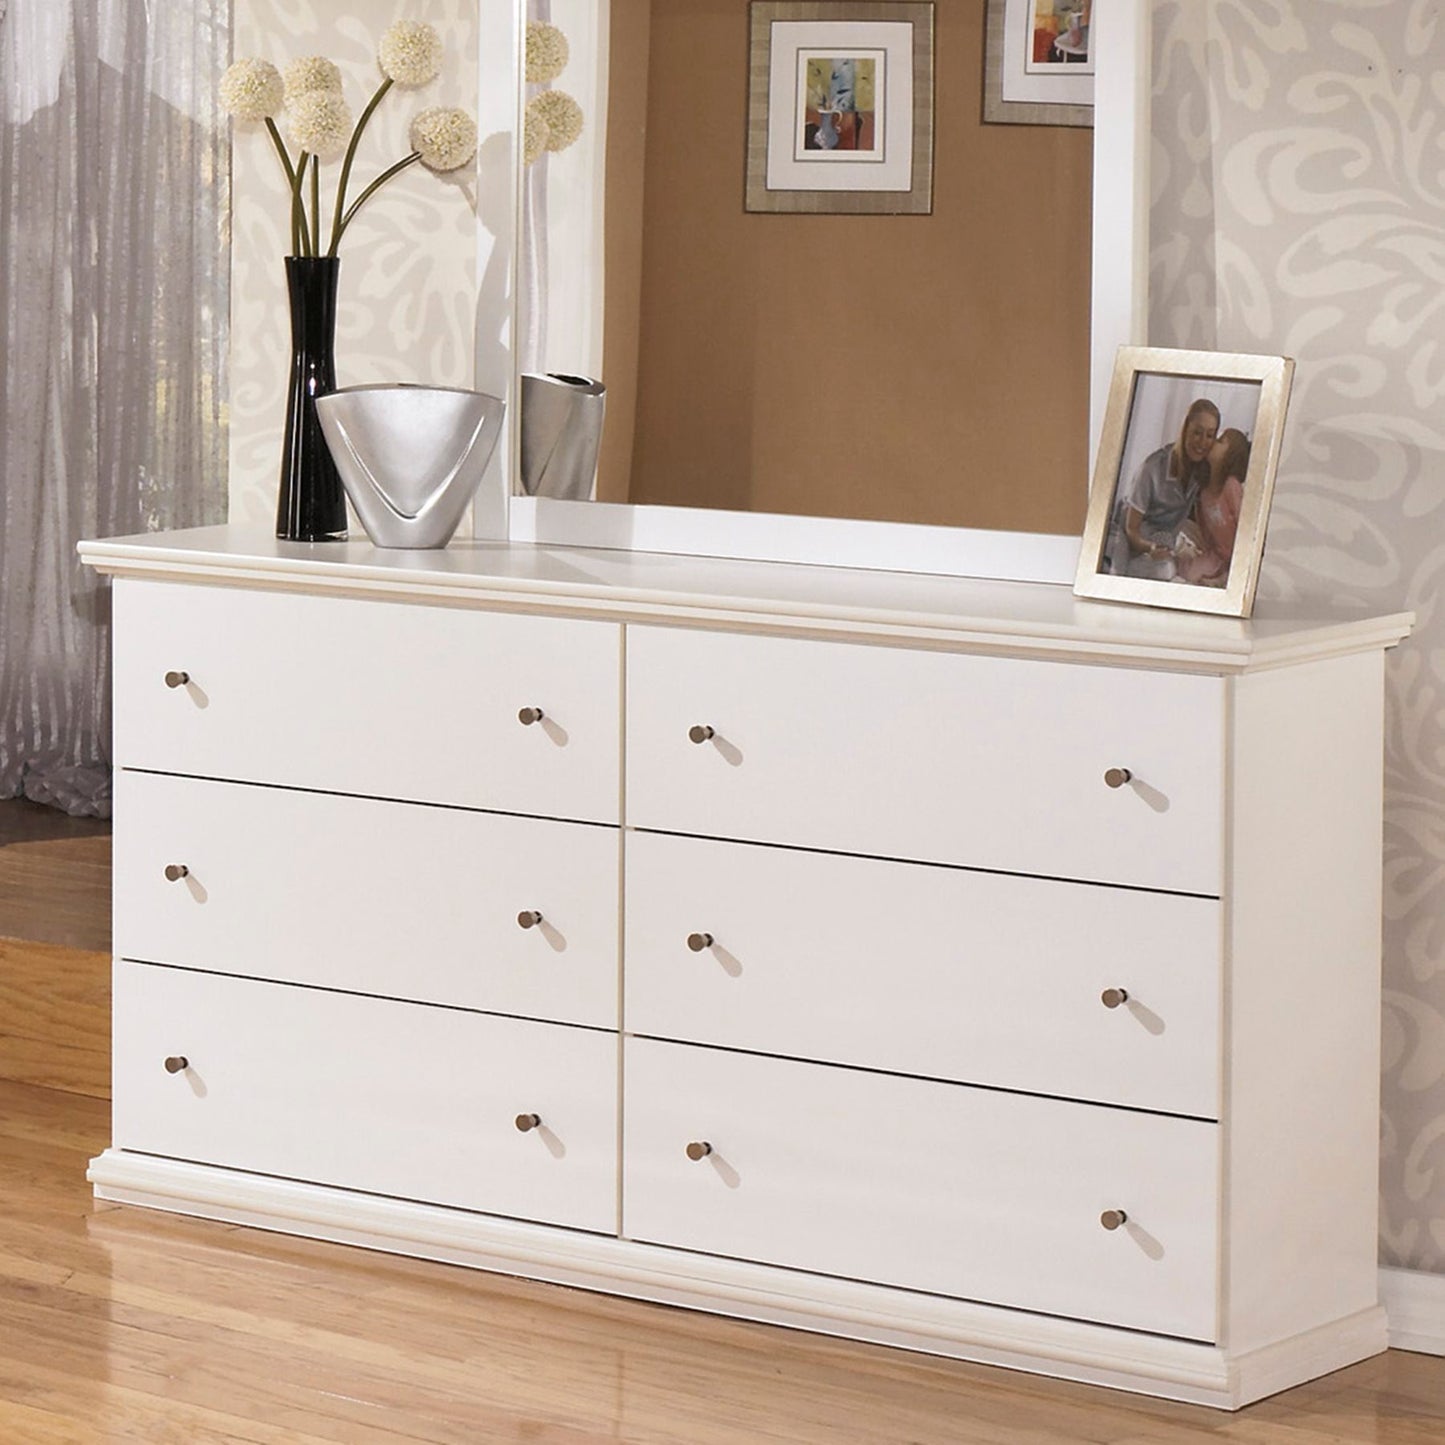 Ashley Bostwick Shoals Six Drawer Dresser in White - The Furniture Space.